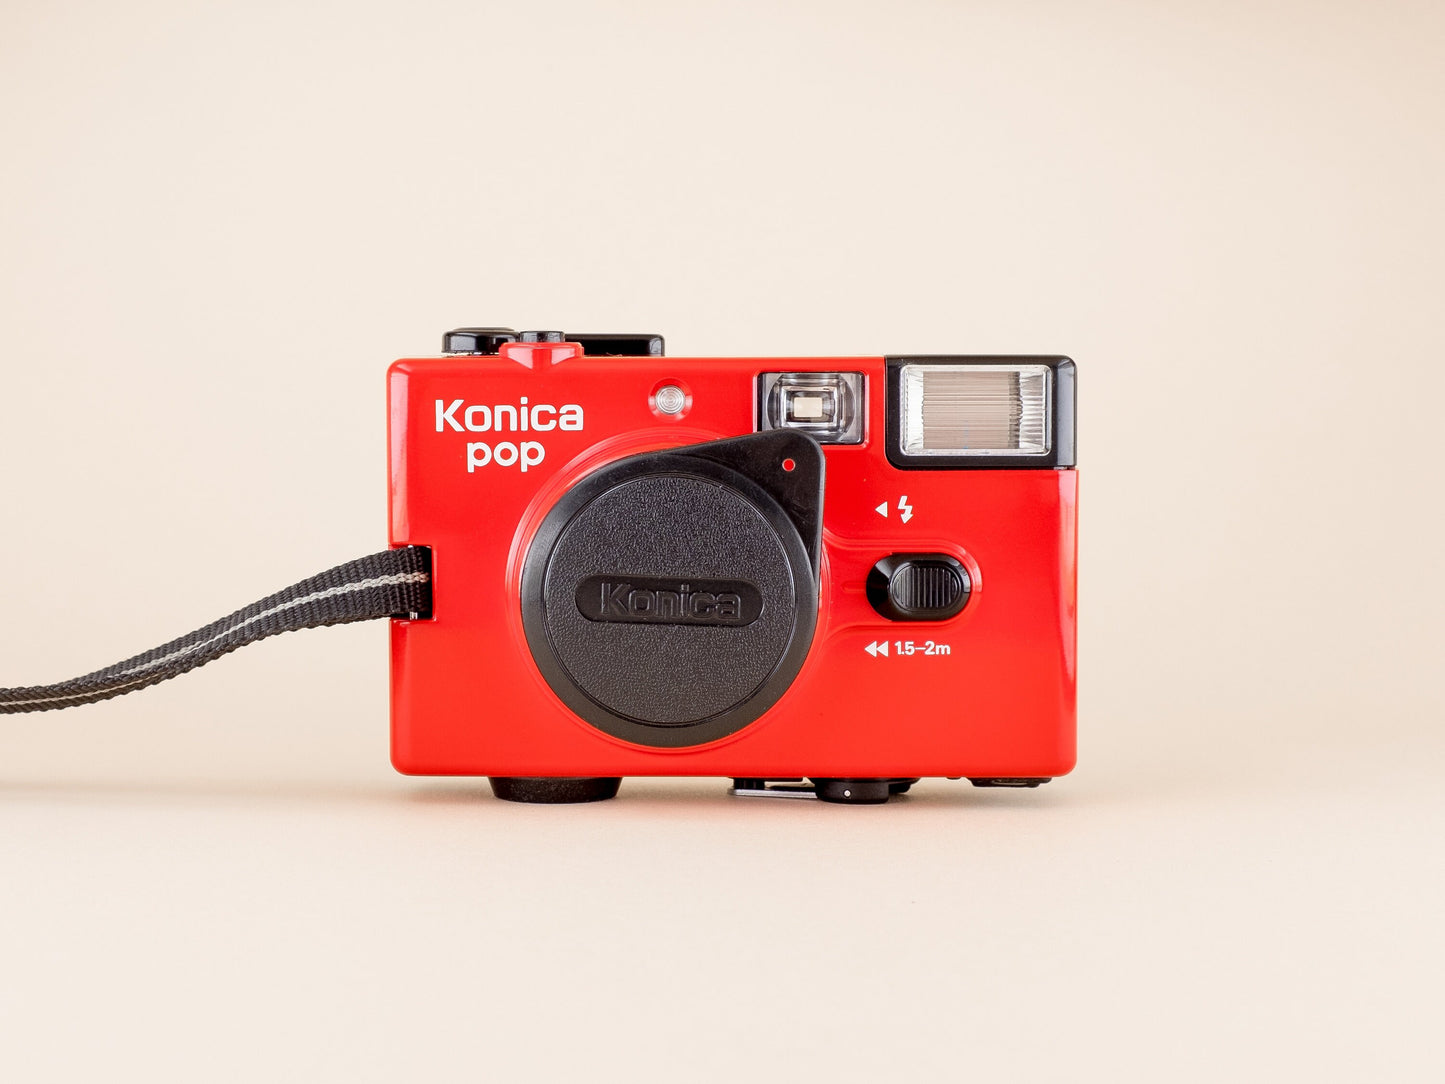 Konica POP | Vintage 1980's Analogue Film Camera | The Perfect Party Camera | With Original Packaging and Case